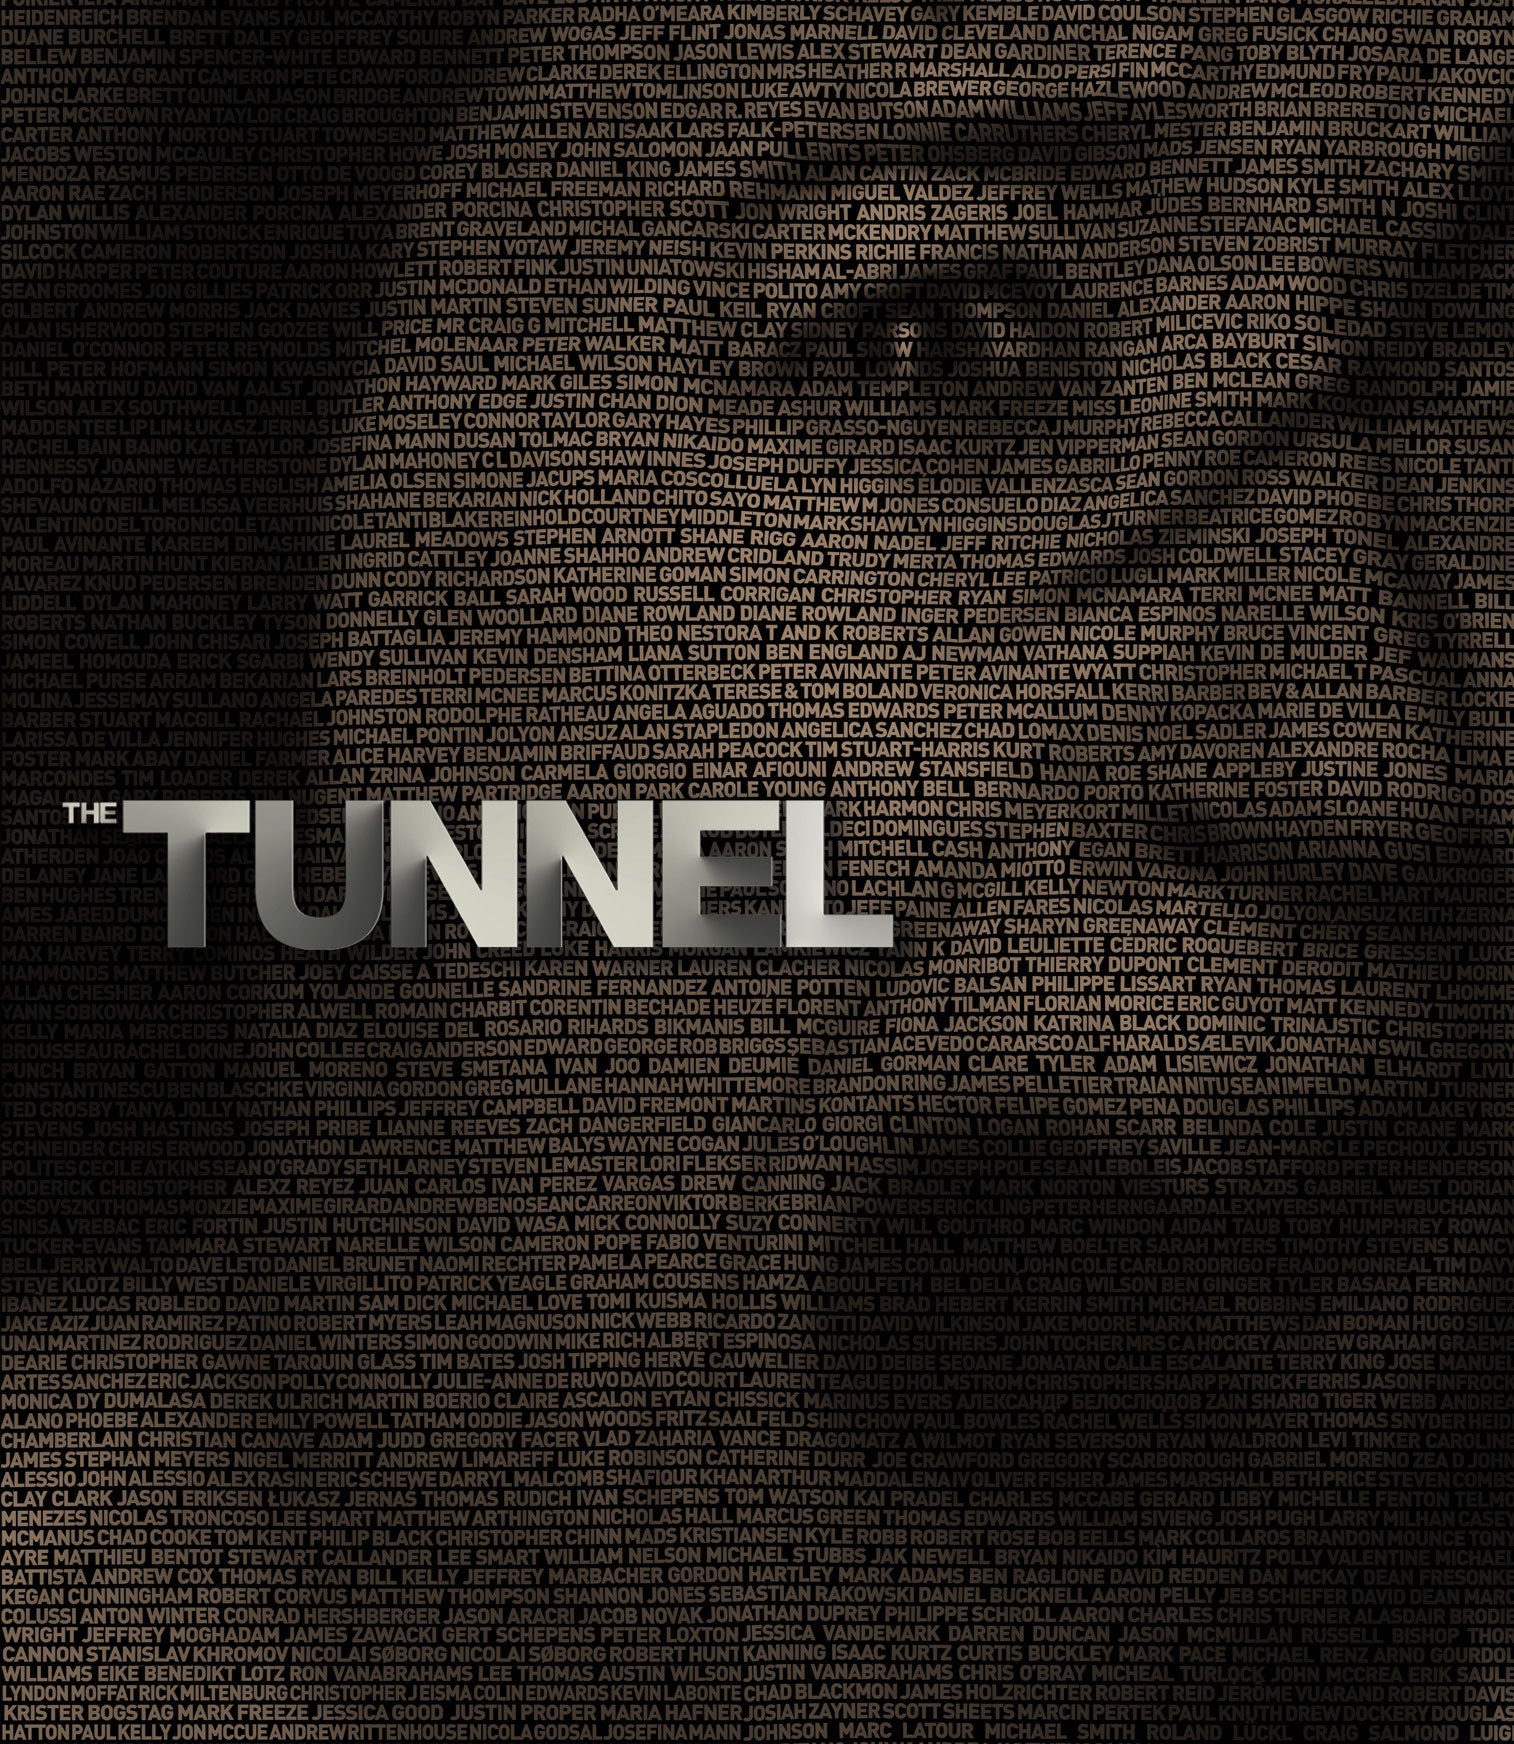 THE TUNNEL (LIMITED EDITION) BLU-RAY